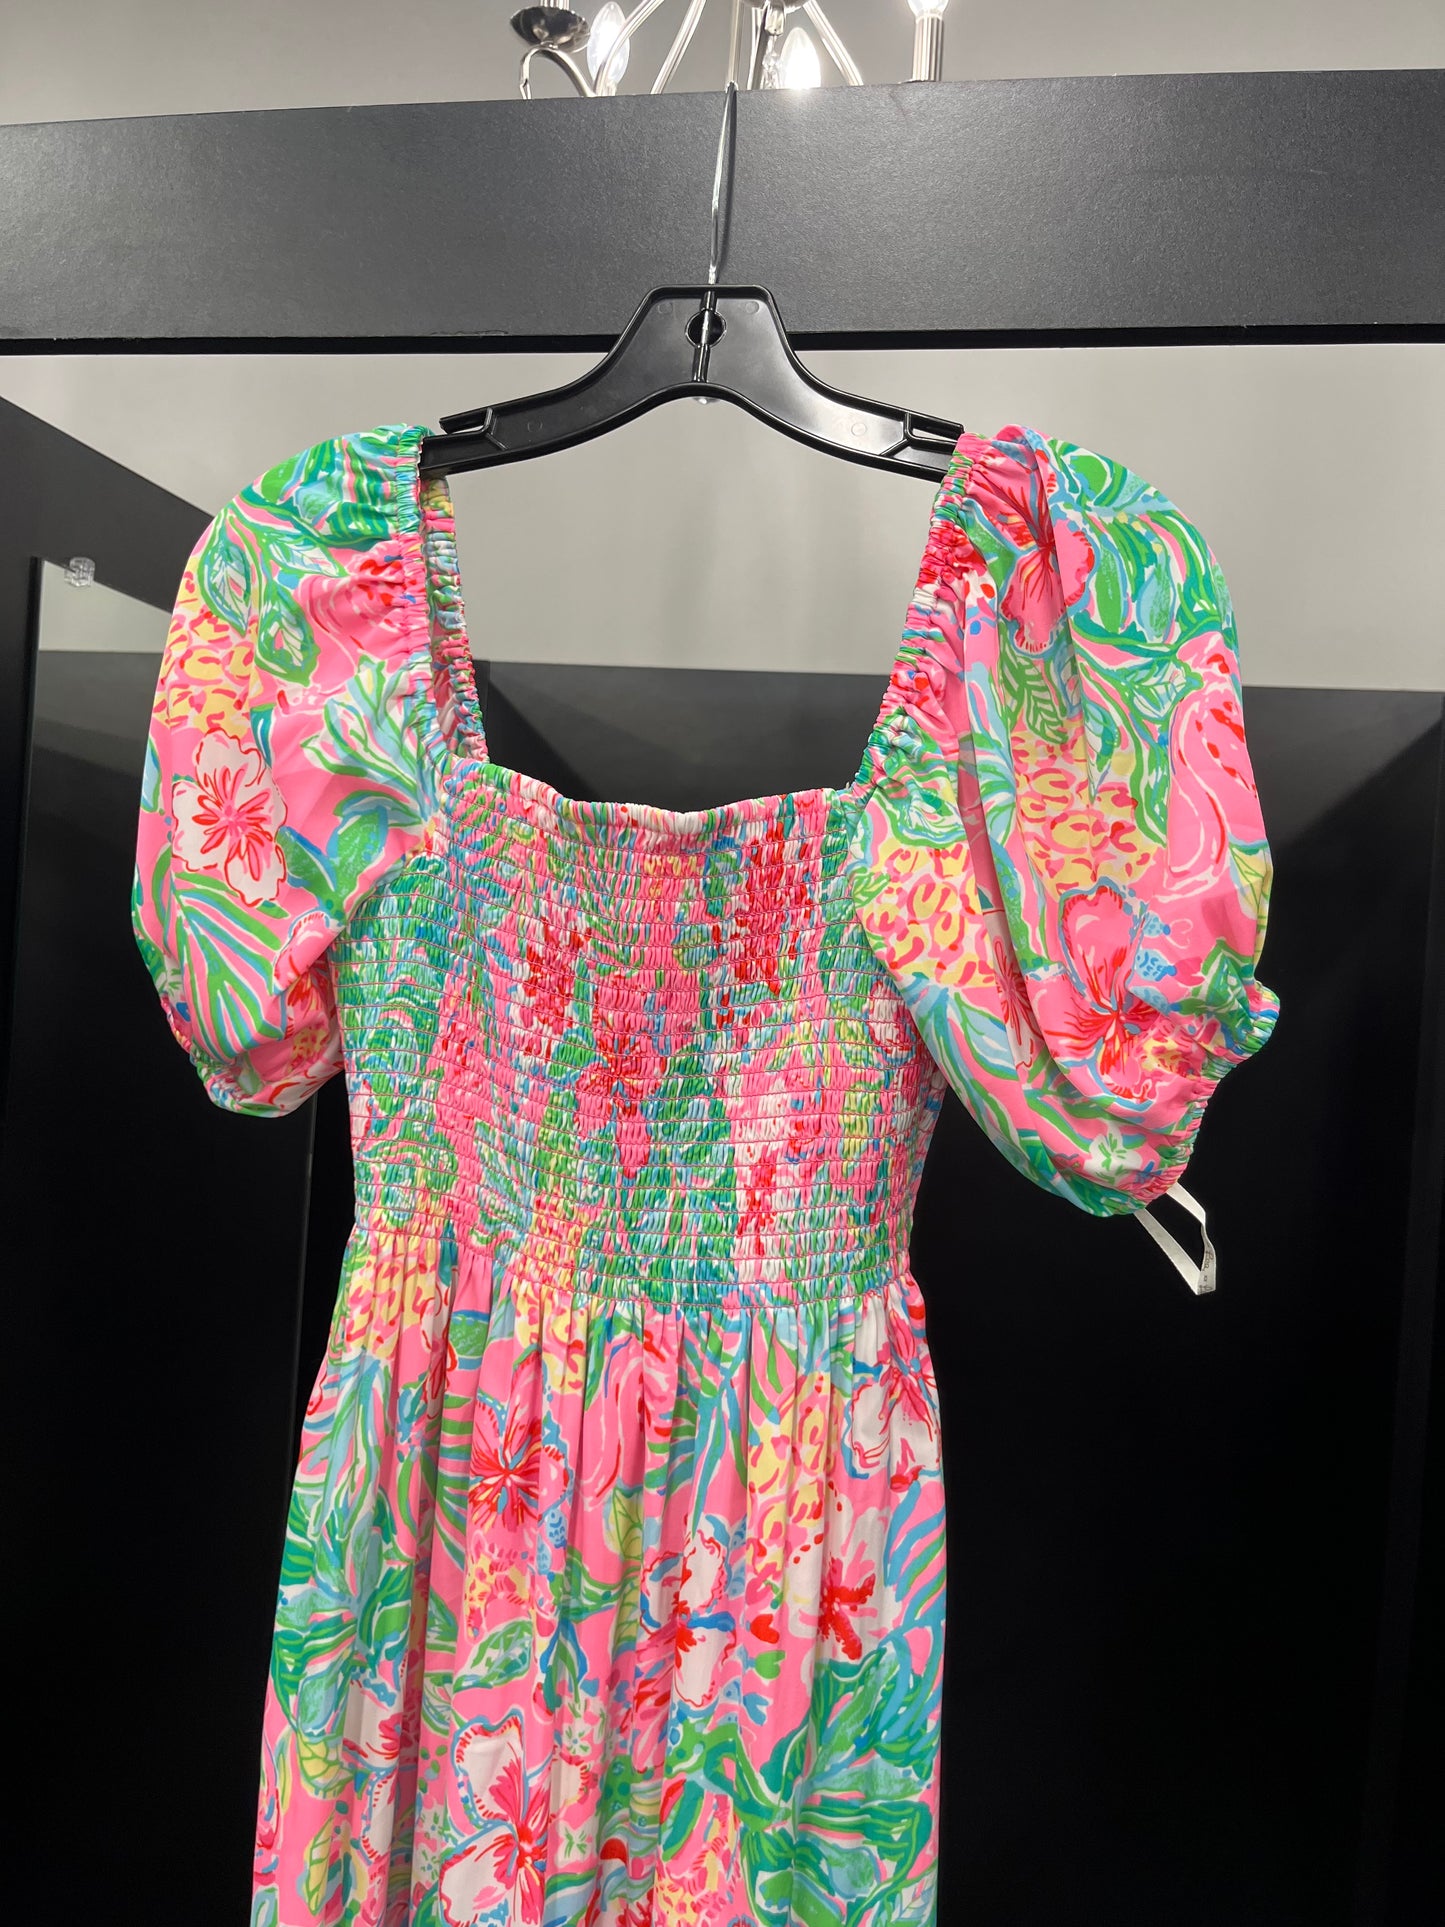 Multi-colored Dress Party Midi Lilly Pulitzer, Size S